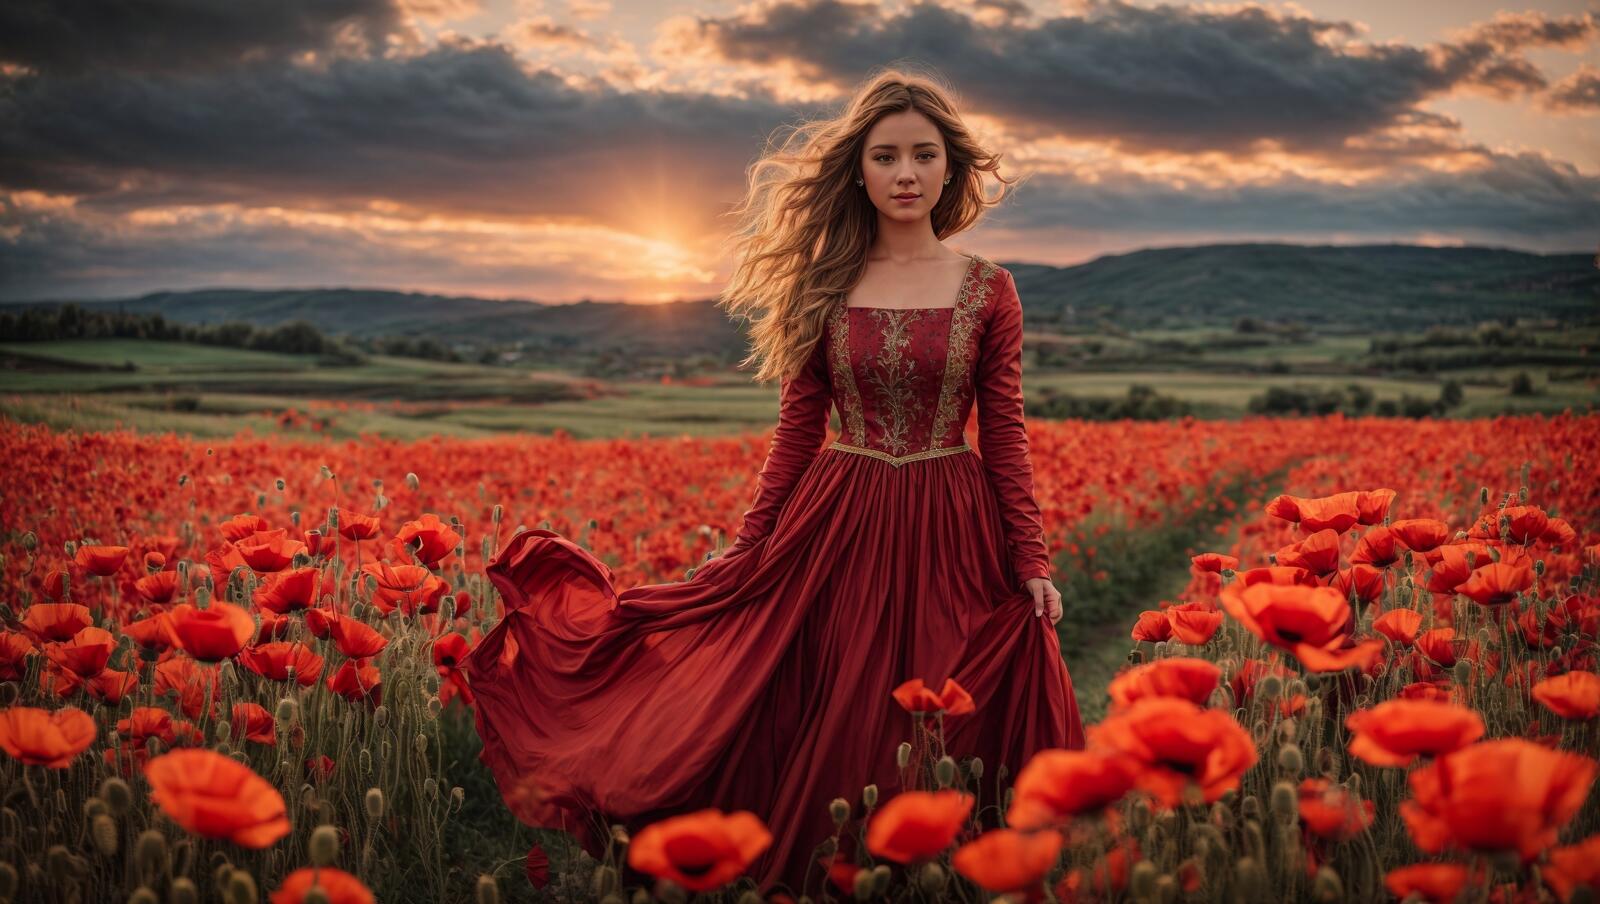 Free photo A woman in a red dress stands in a poppy field at sunset